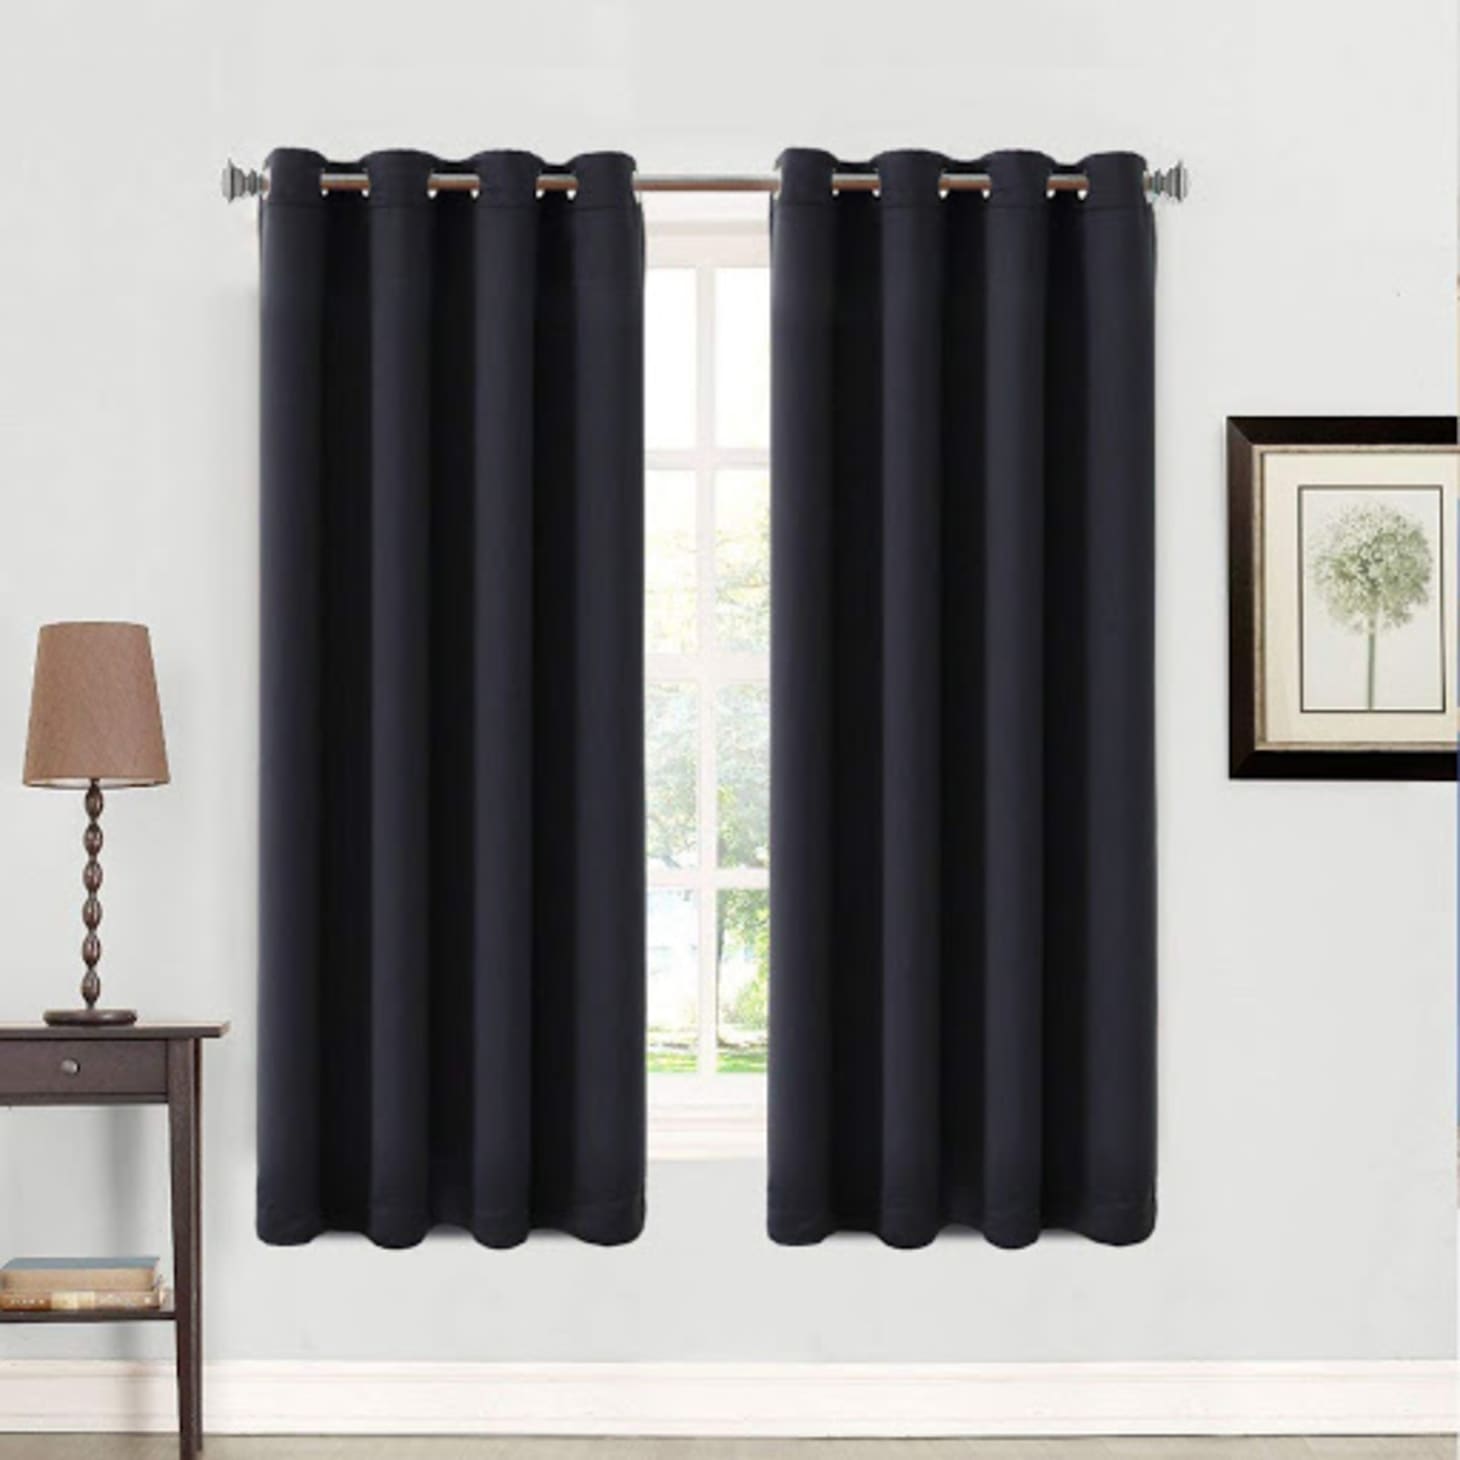 Amazon Sale Blackout Curtains October 2018 | Apartment Therapy